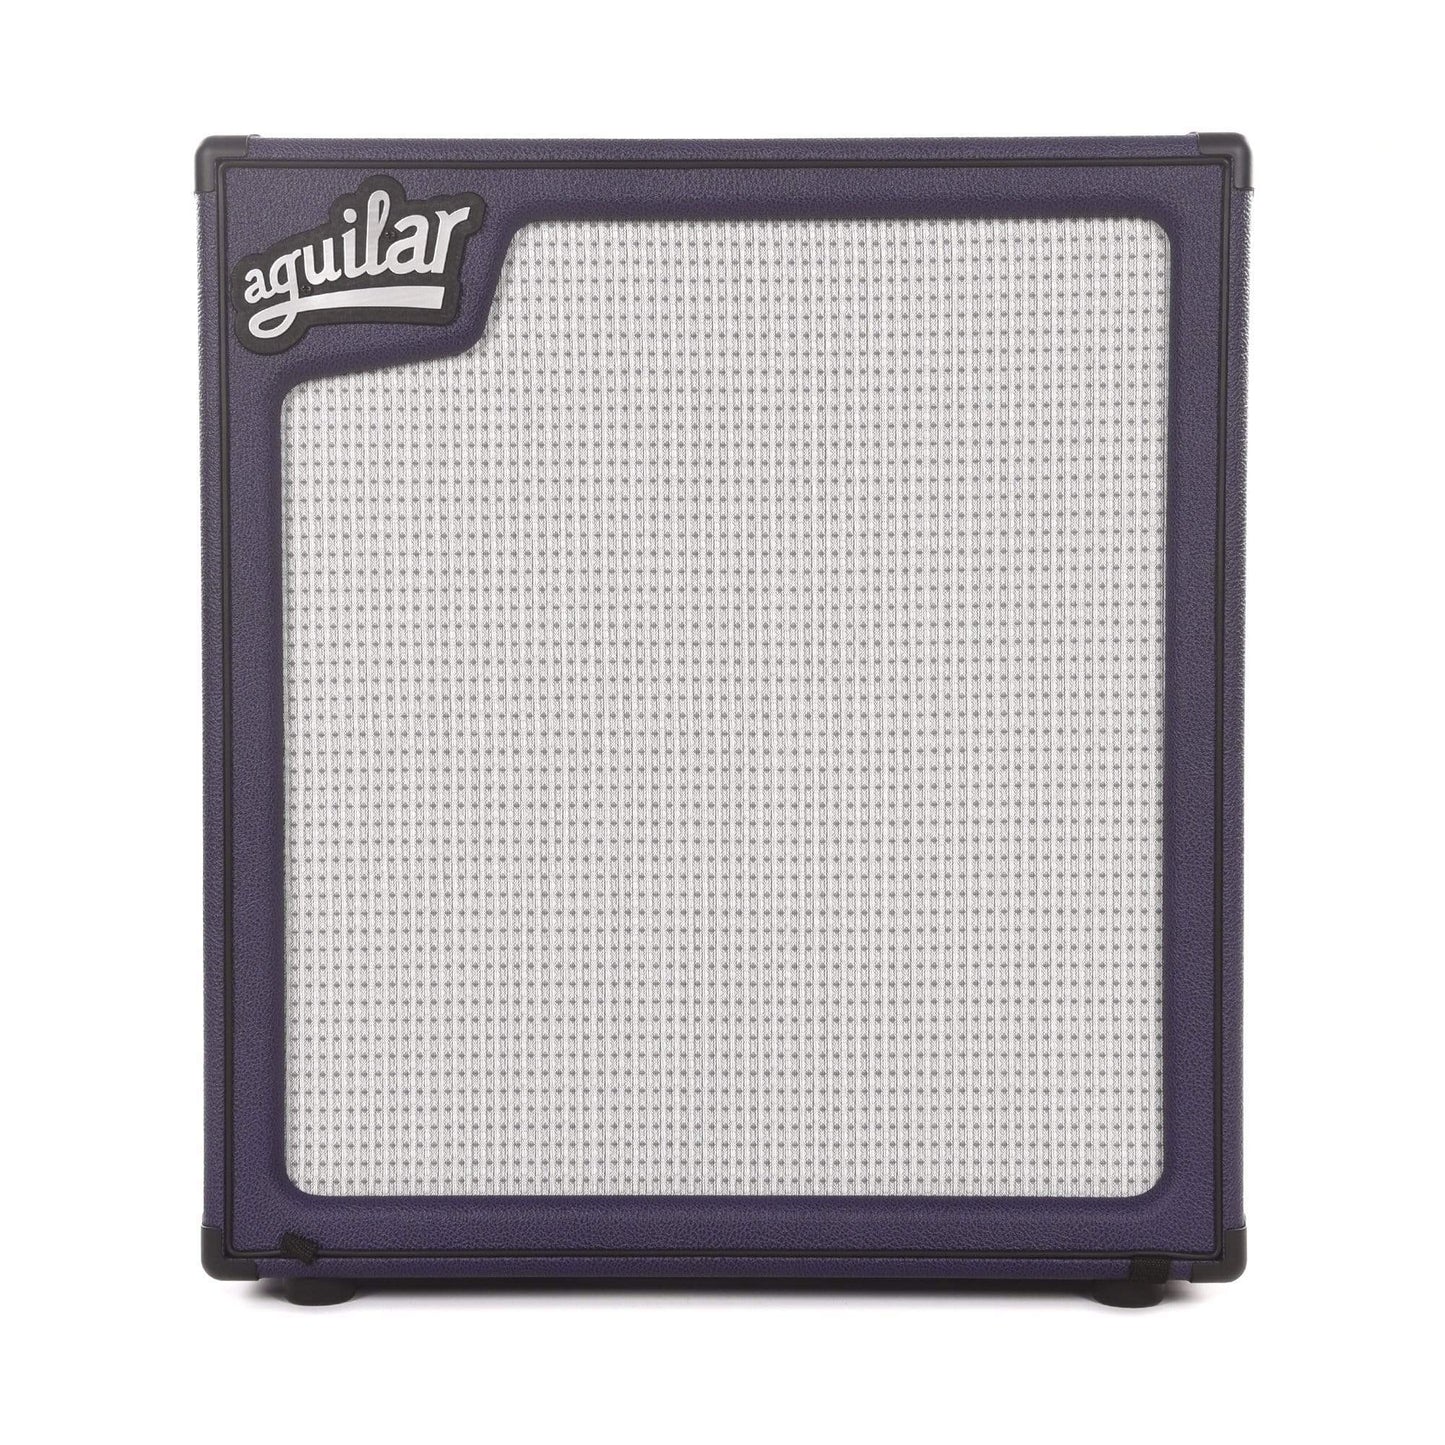 Aguilar Limited Edition SL 410x Super Light Bass Cabinet 4 ohm Royal Purple Amps / Guitar Cabinets